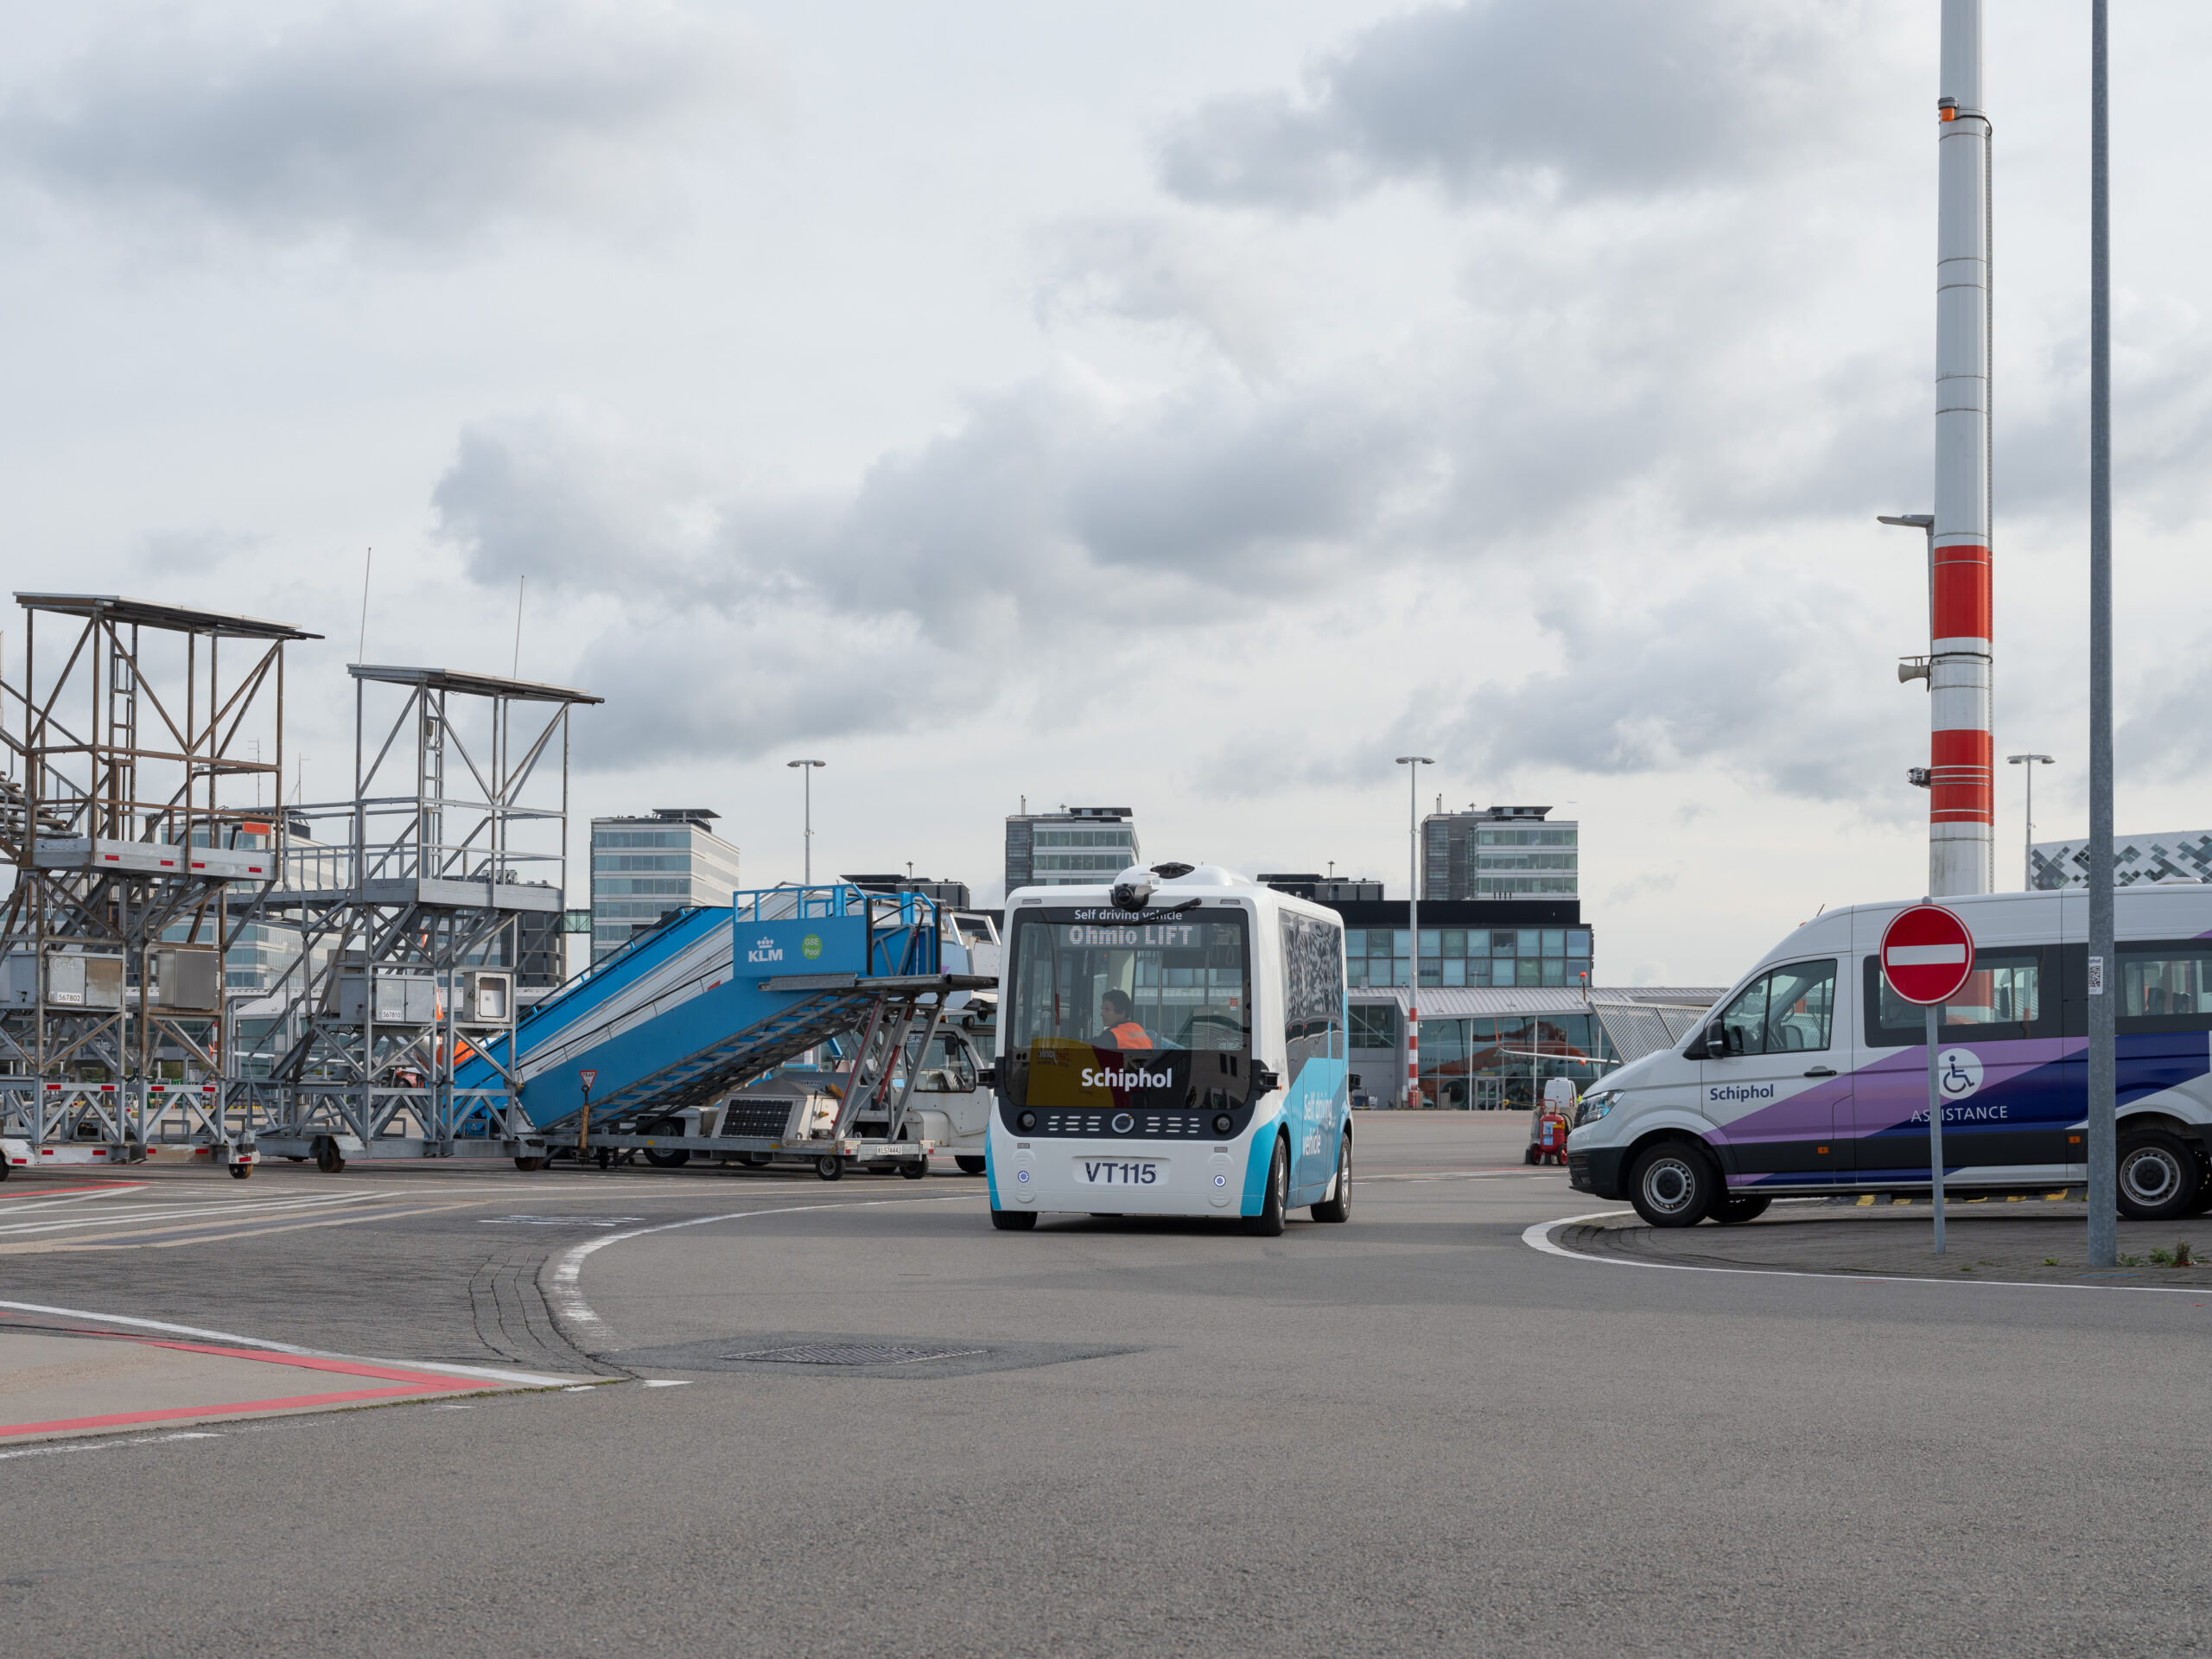 Schiphol is the first Dutch airport to use this technology from Ohmio